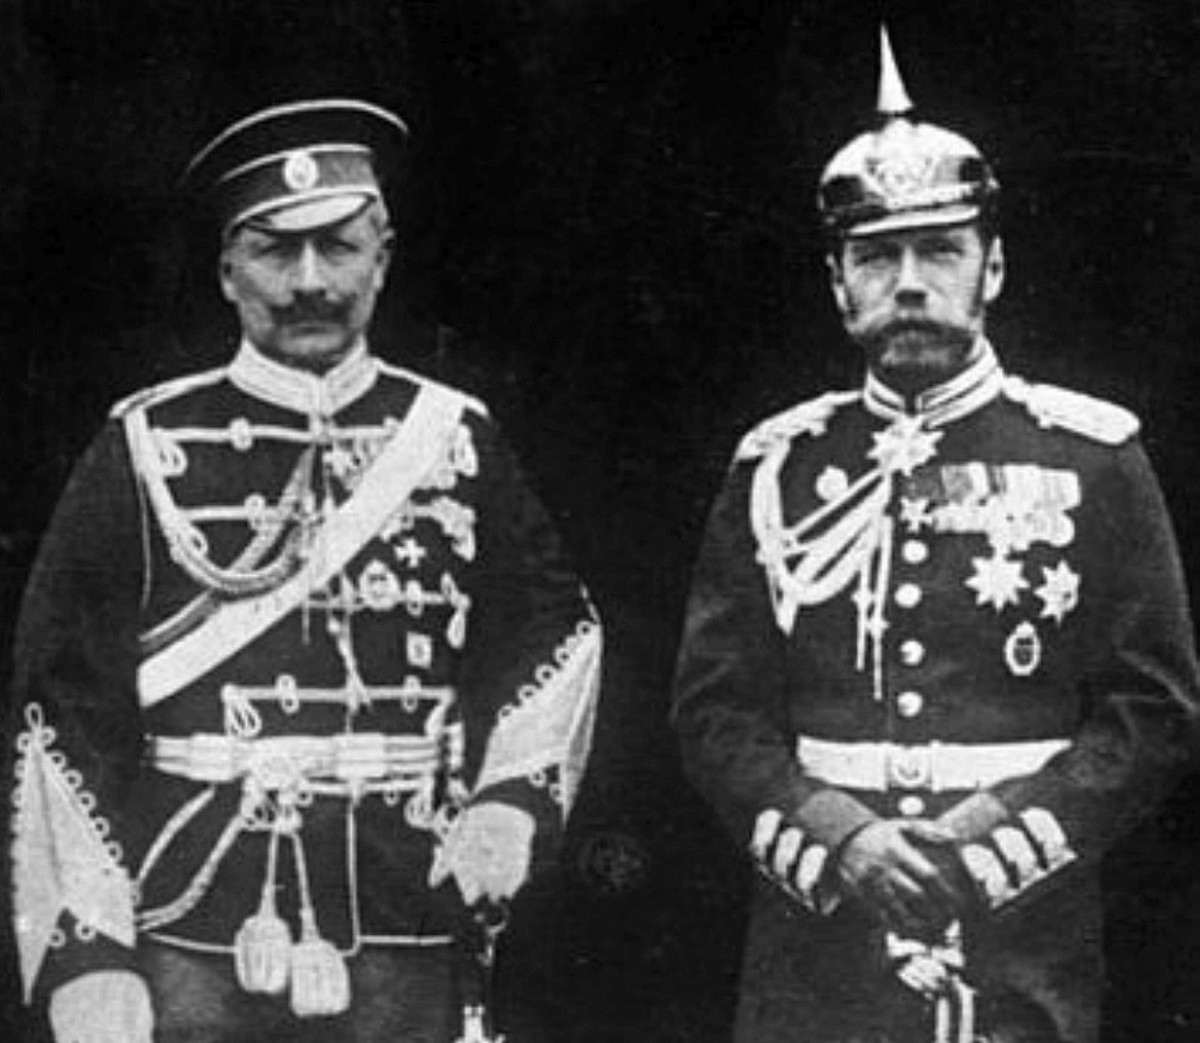 Royalty and Military Service During World War I